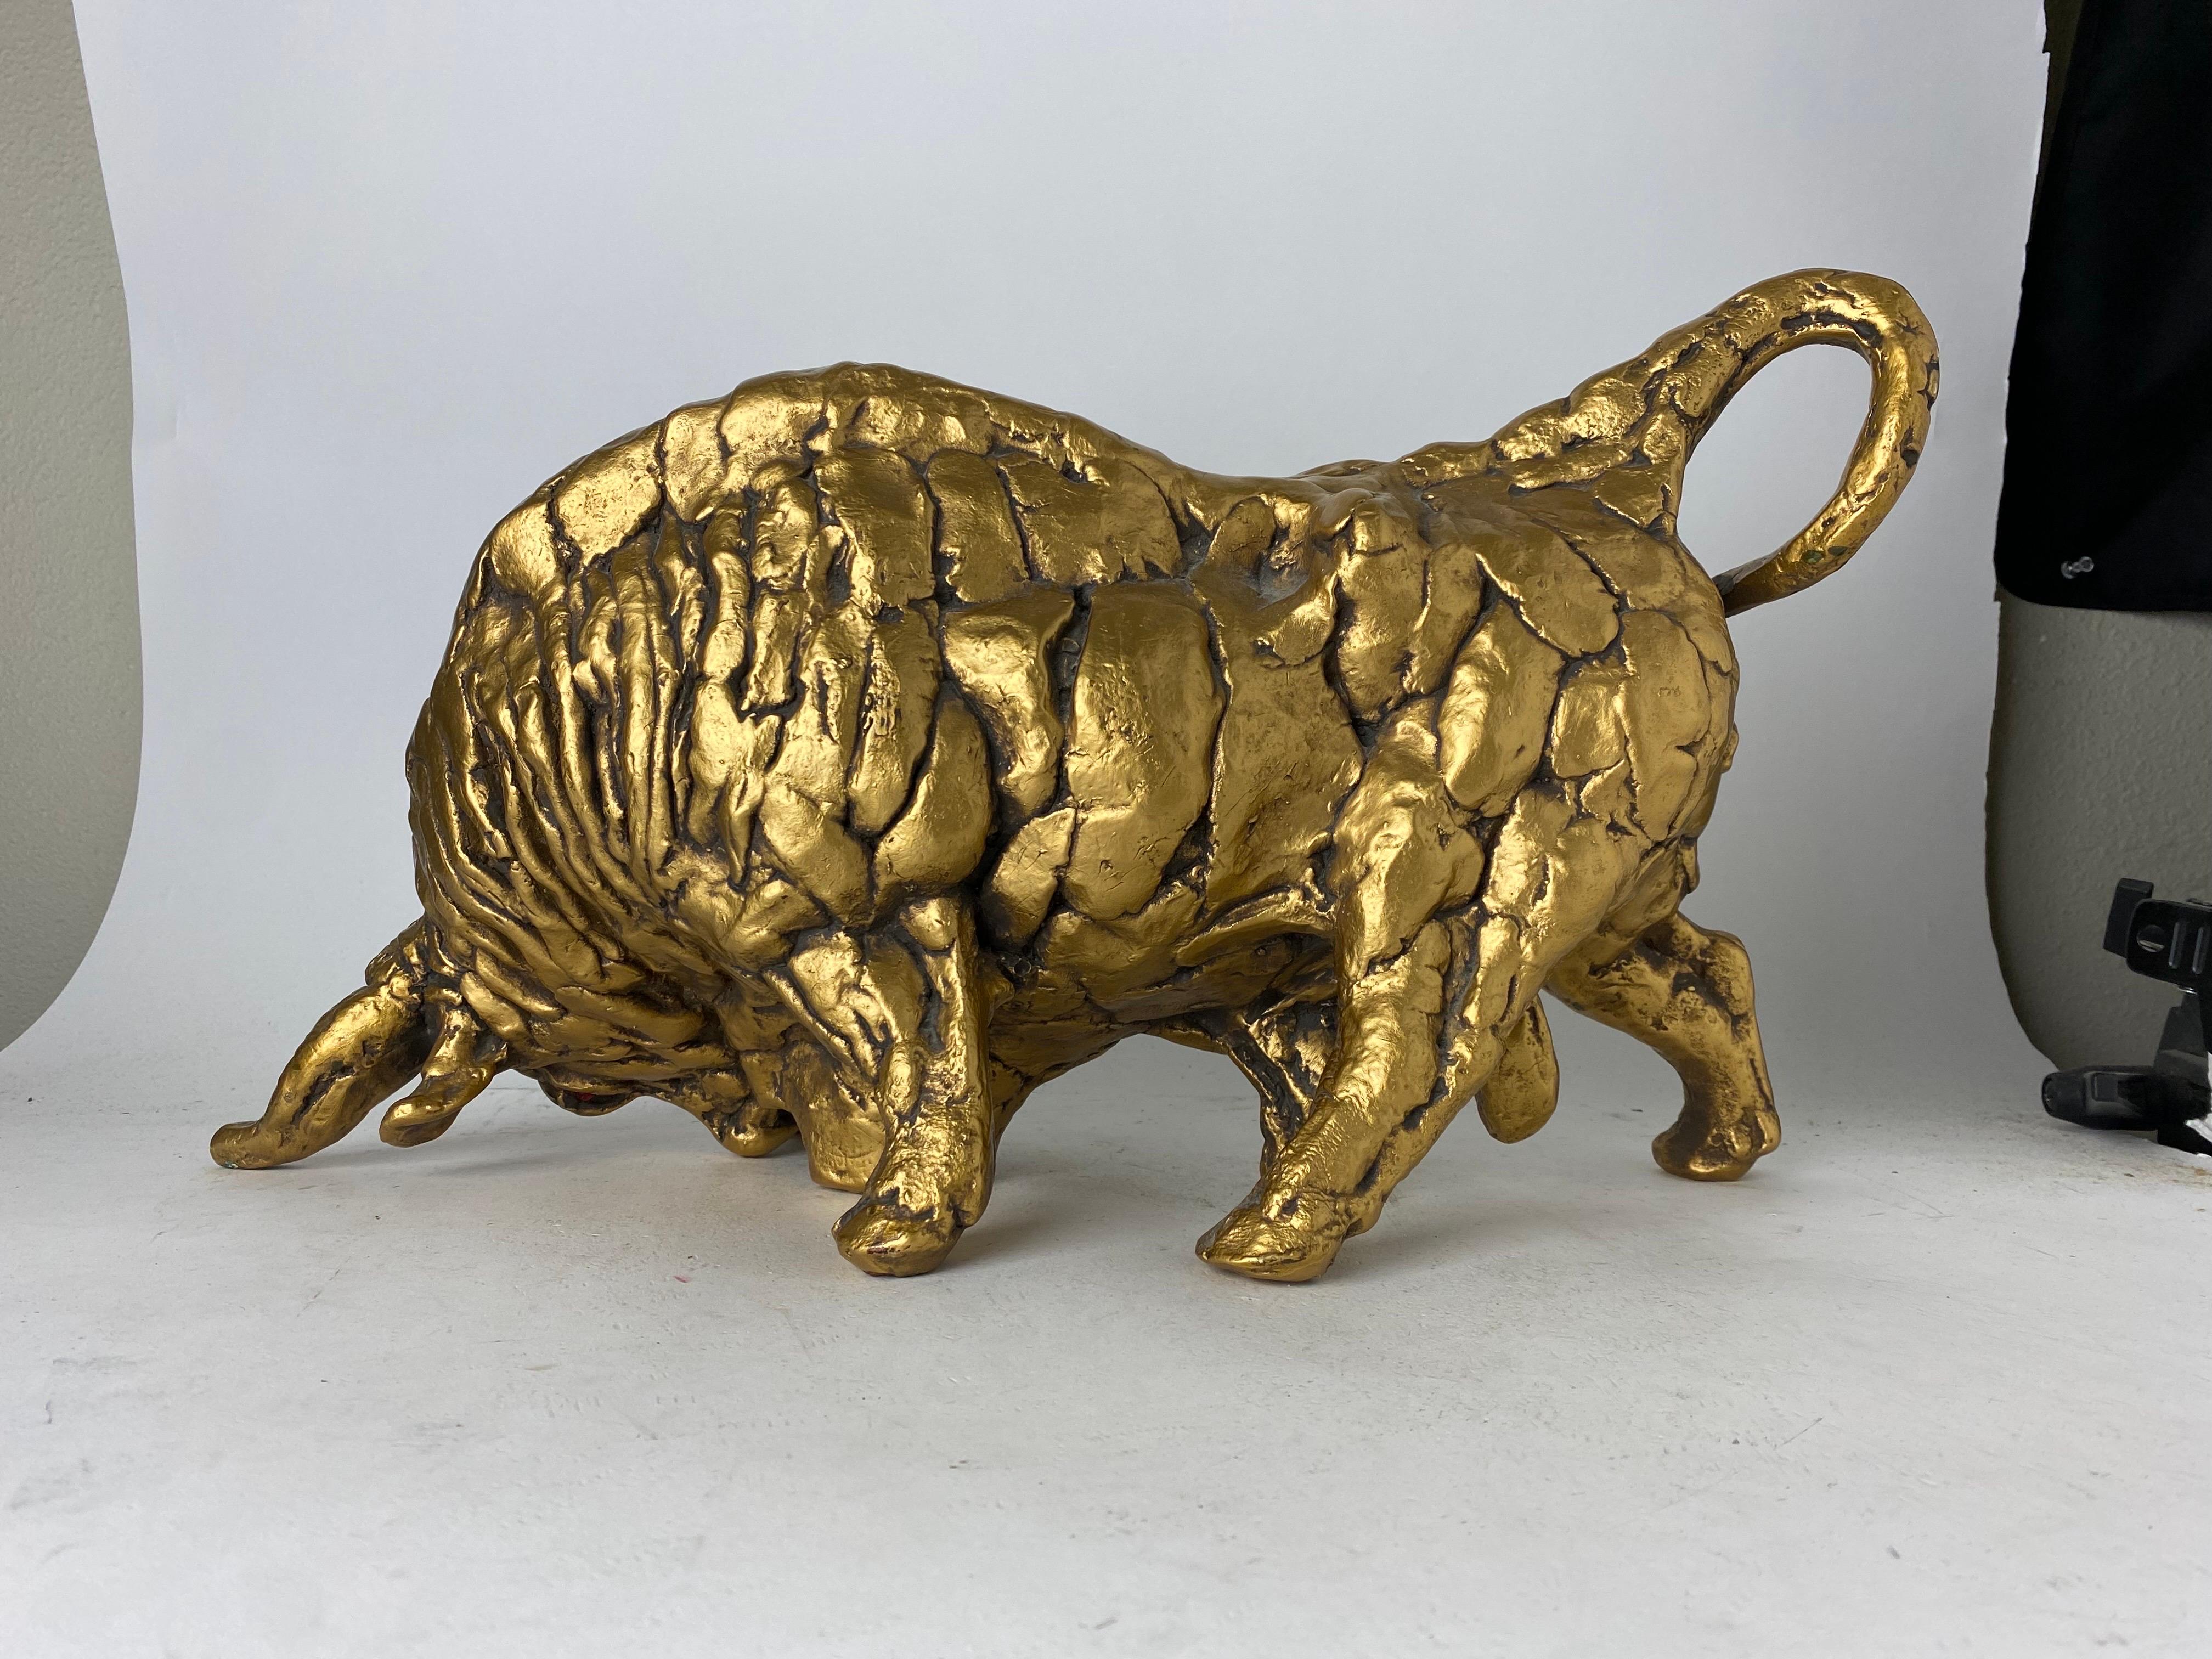 For your consideration we have a fantastic gilt ceramic sculpture of a charging bull. Life like yet artistic, this bull is showing off its strength and anger, ready to go after you. The bull statue is completed with red glass eyes, they accentuate